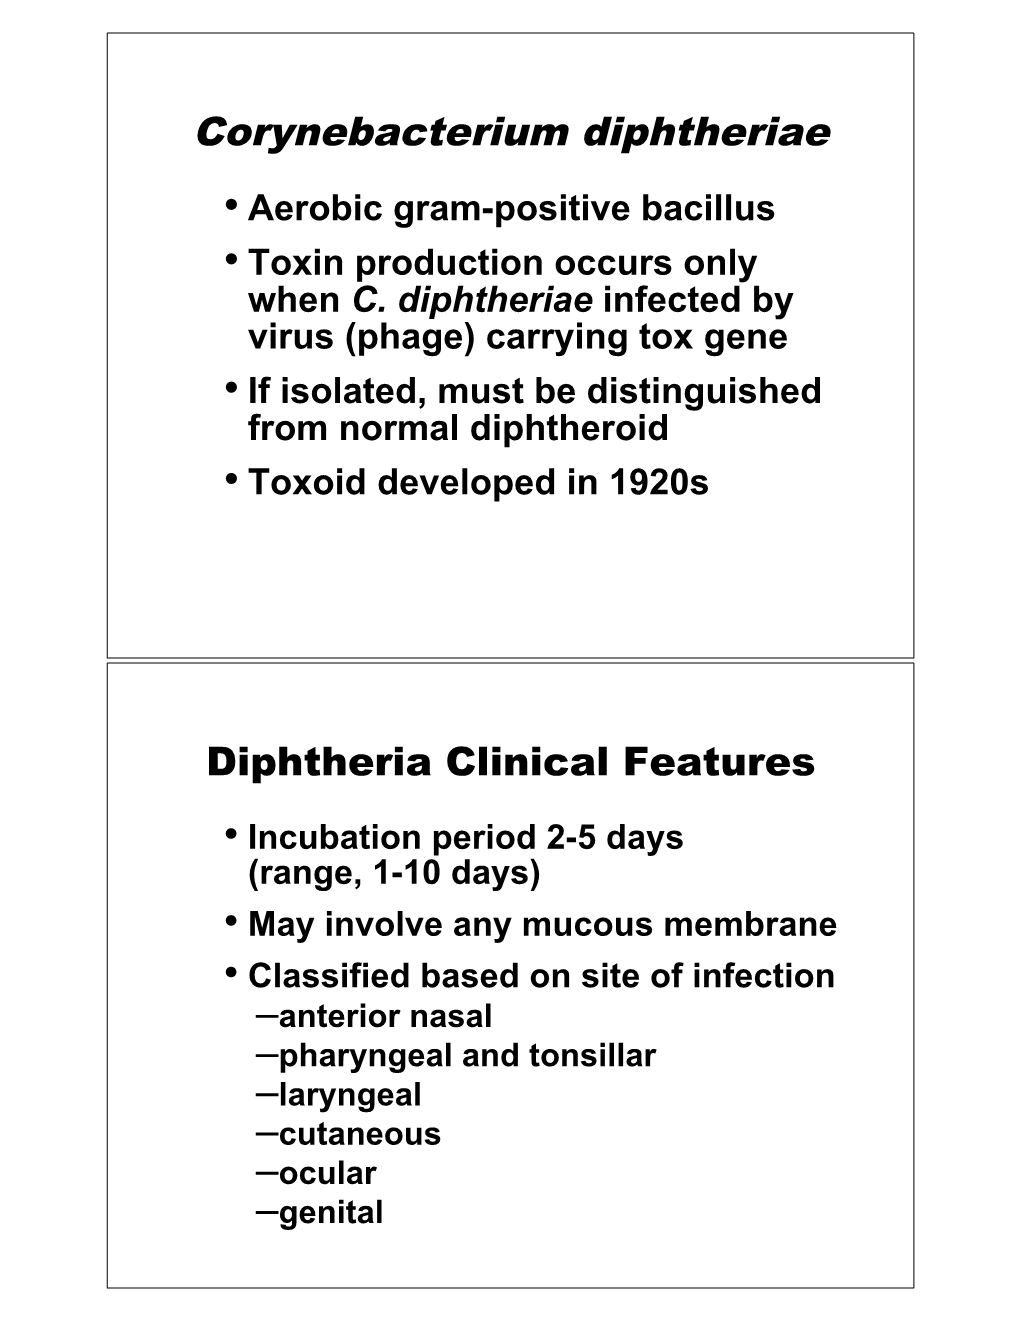 Corynebacterium Diphtheriae • Aerobic Gram-Positive Bacillus • Toxin Production Occurs Only When C